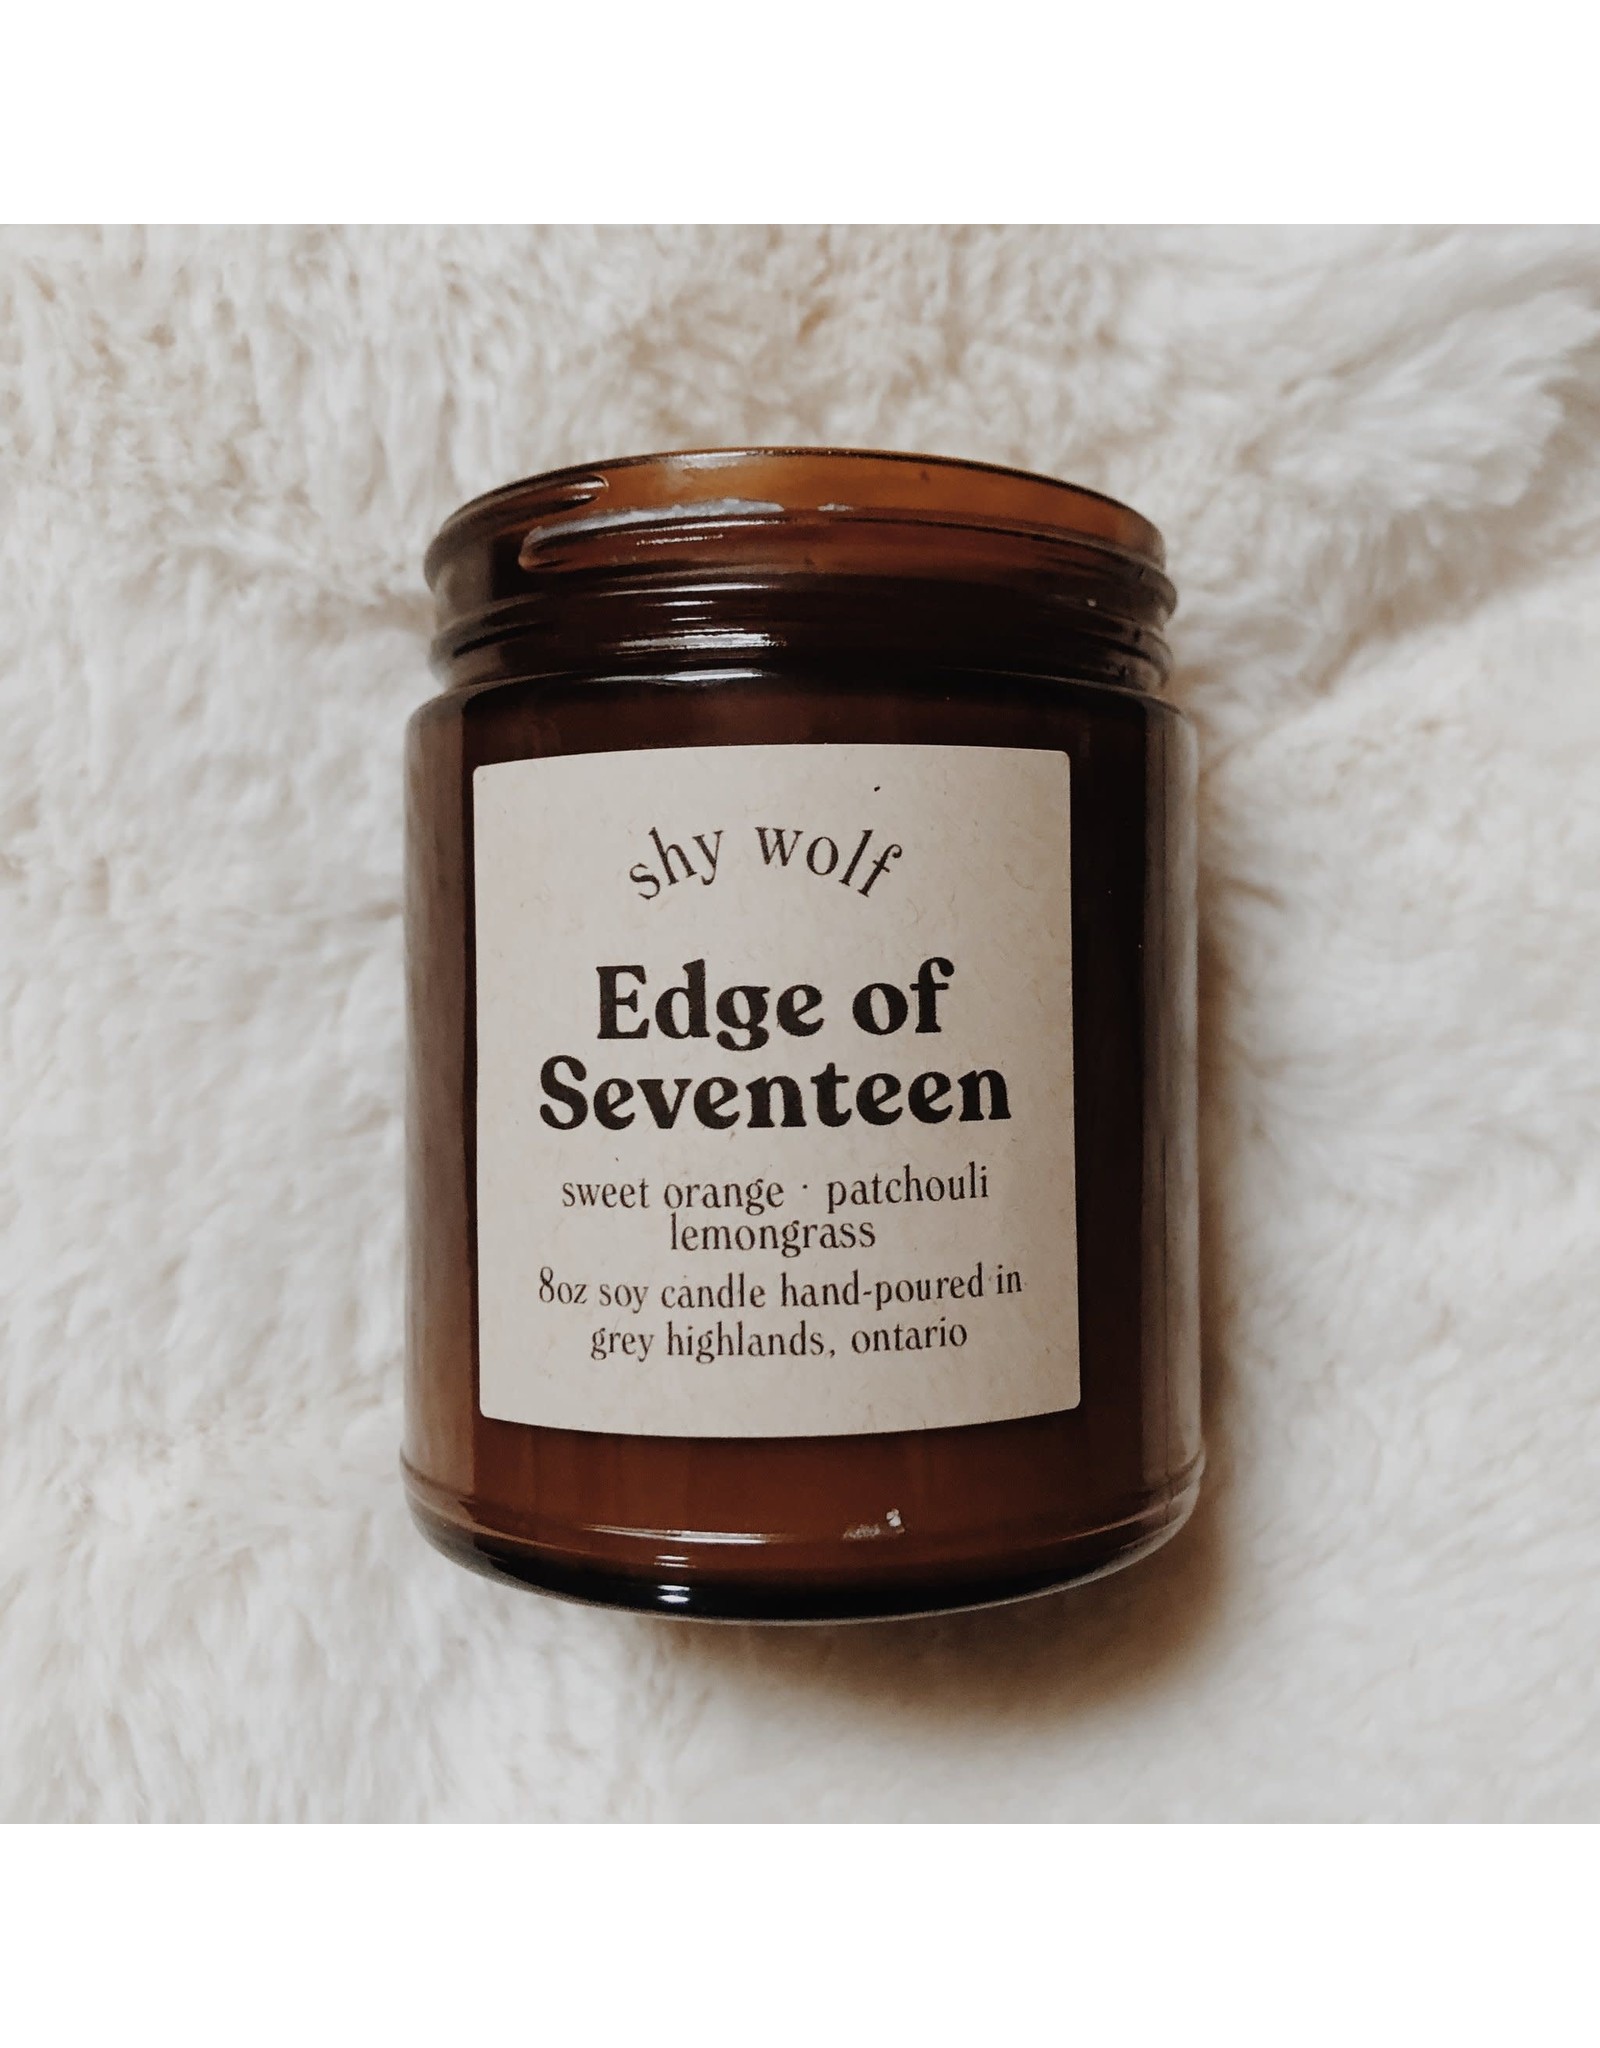 BGS Shy Wolf - Candle / Edge of Seventeen (8 oz)